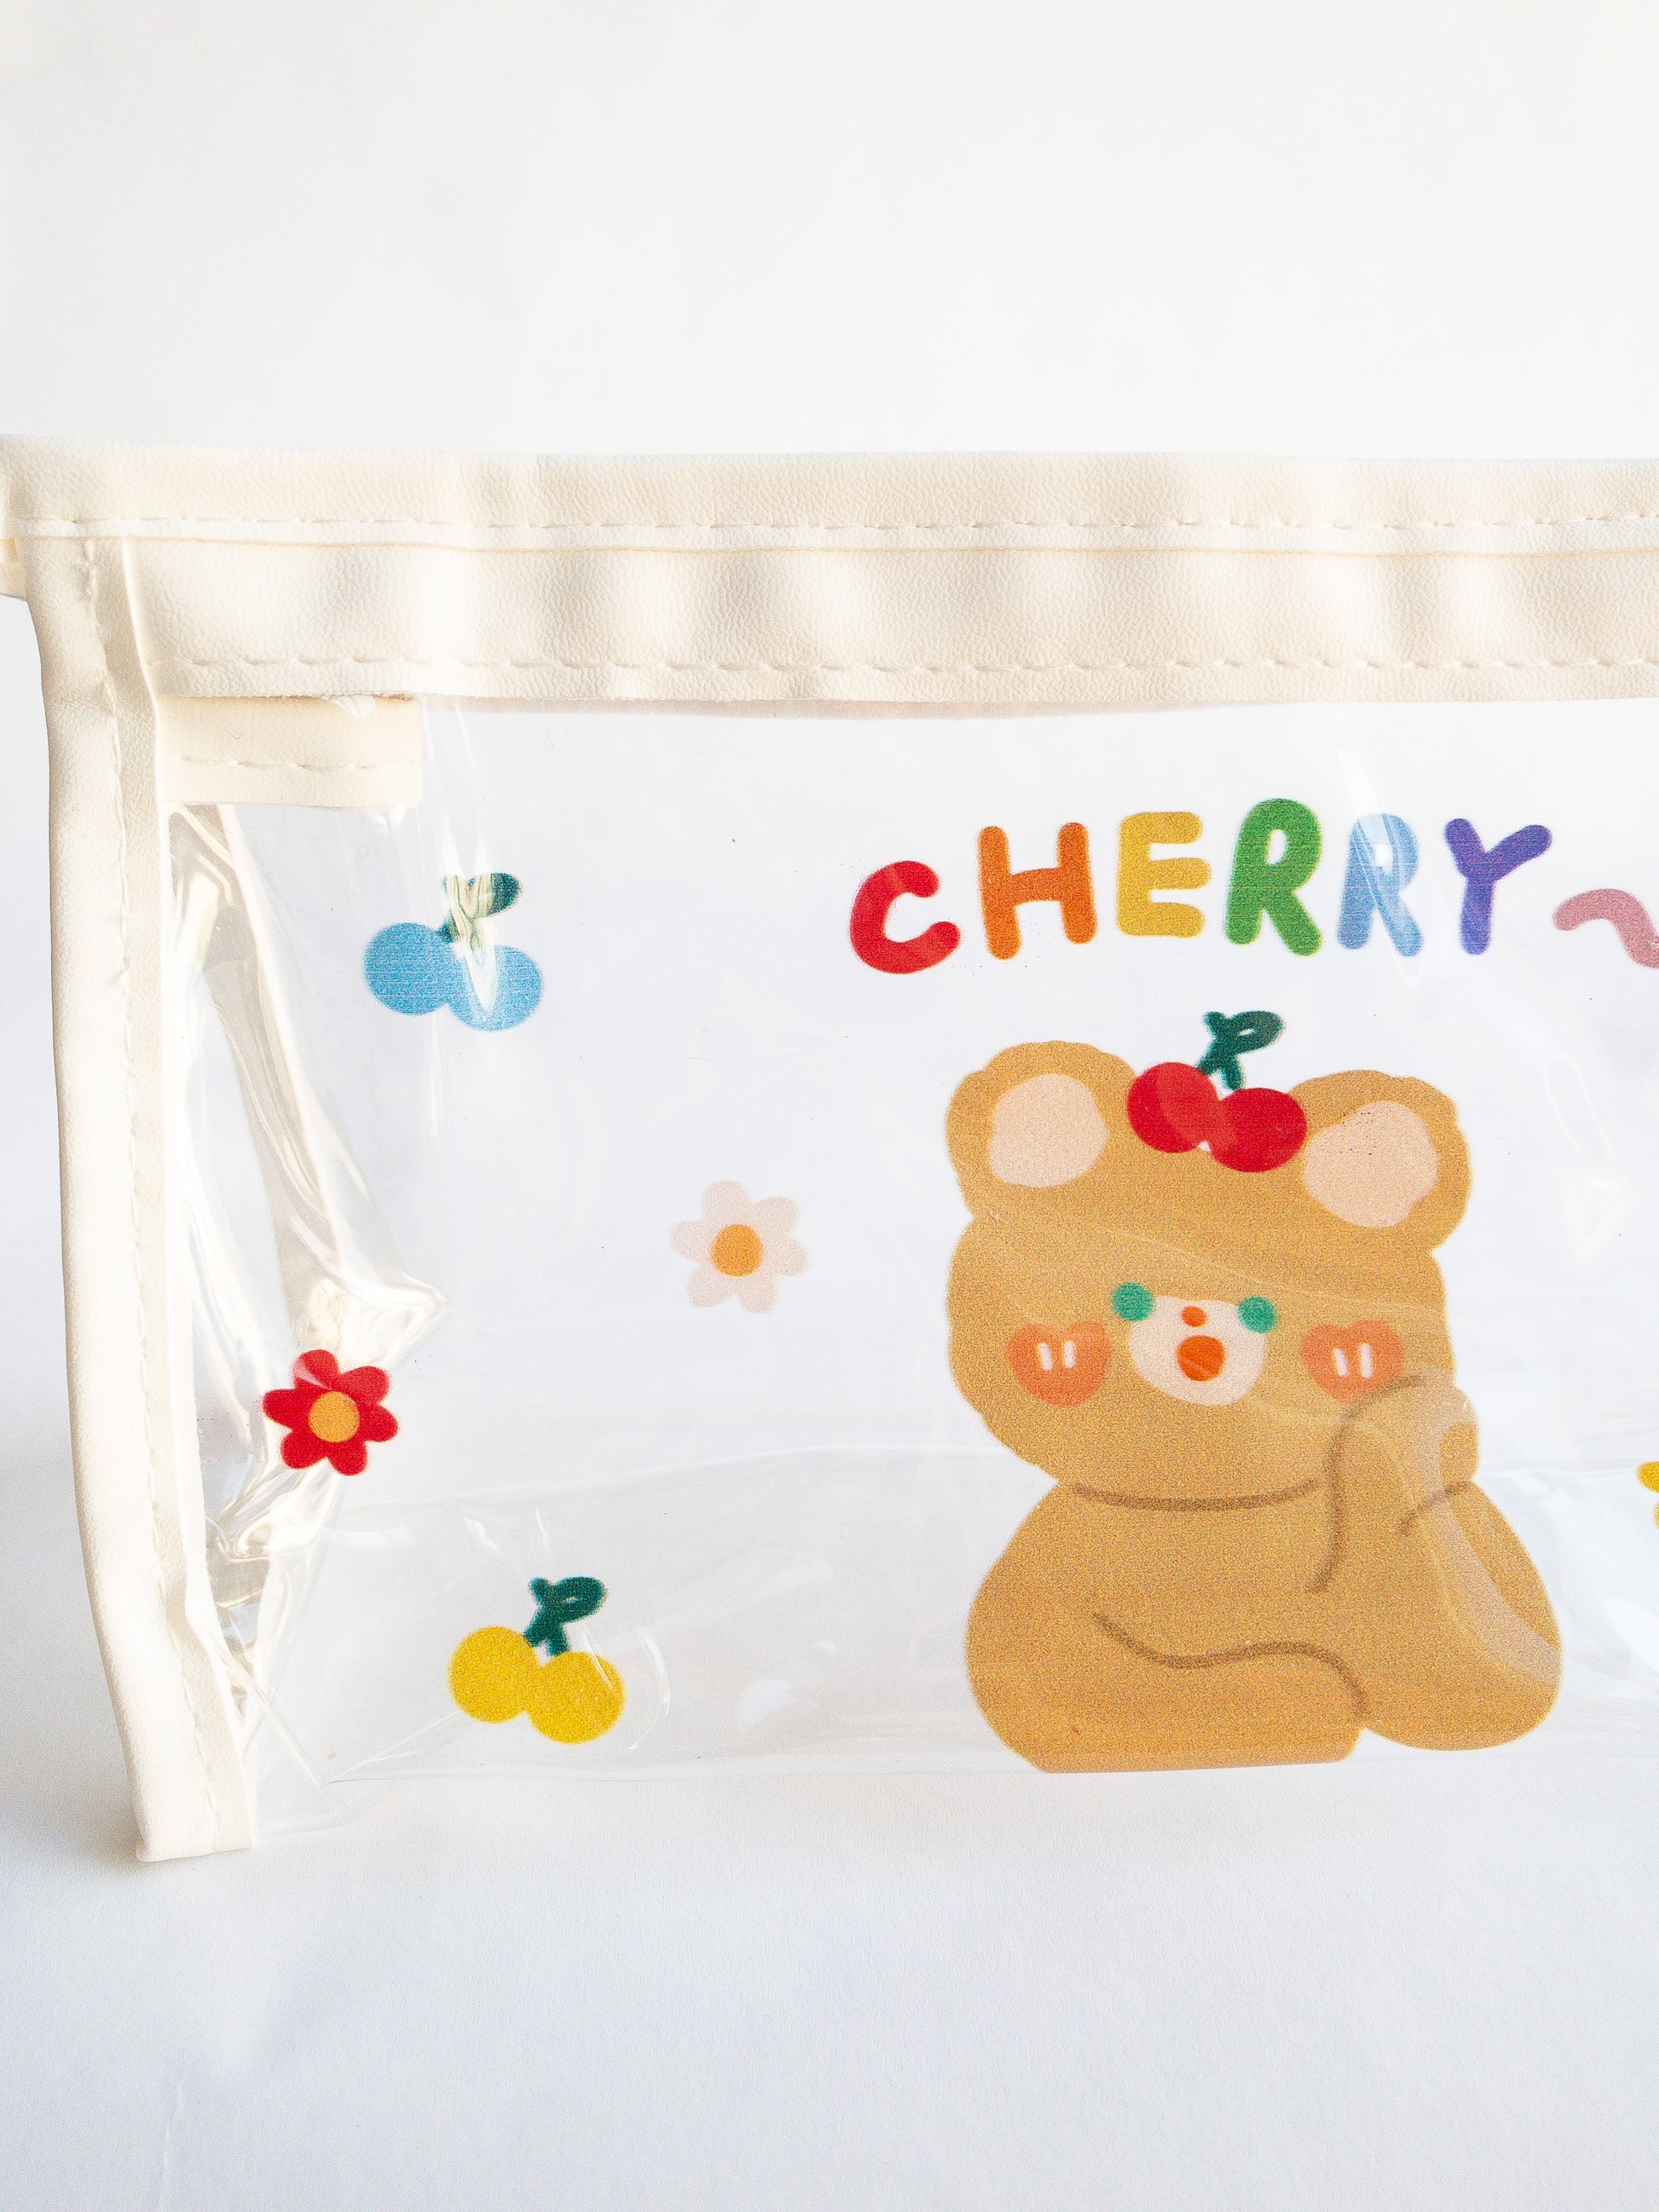 Have you wanted a storage pouch to take Eggy Cakes clips on the go? Here is the cutest little cherry bear pouch for just that! Use it to store your makeup, pencils, or hair clips. Clear pouch with an adorable bear, flower and cherries on one side.